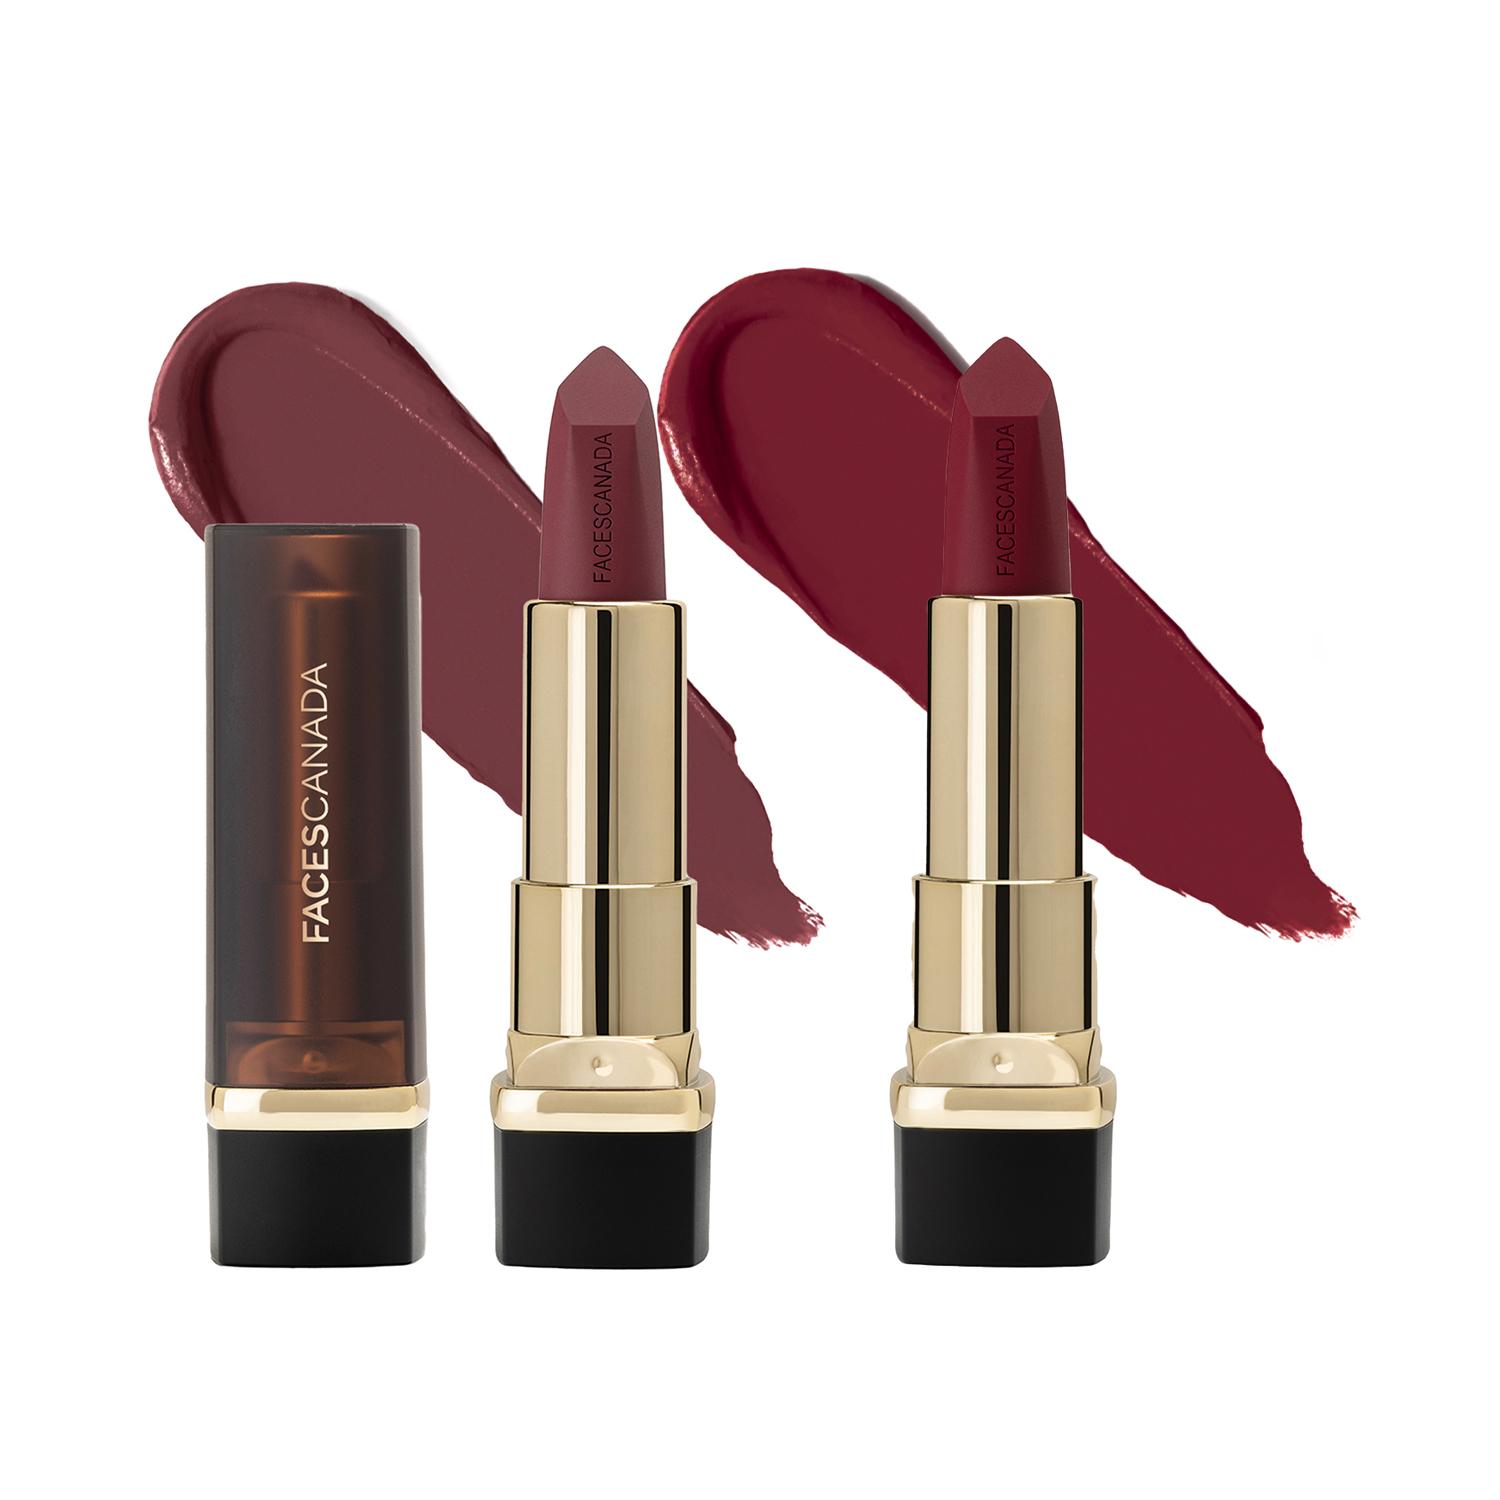 Faces Canada | Faces Canada Festive Hues - Comfy Matte Creme Lipstick Pack of 2 - Oh So Serious & Over And Out